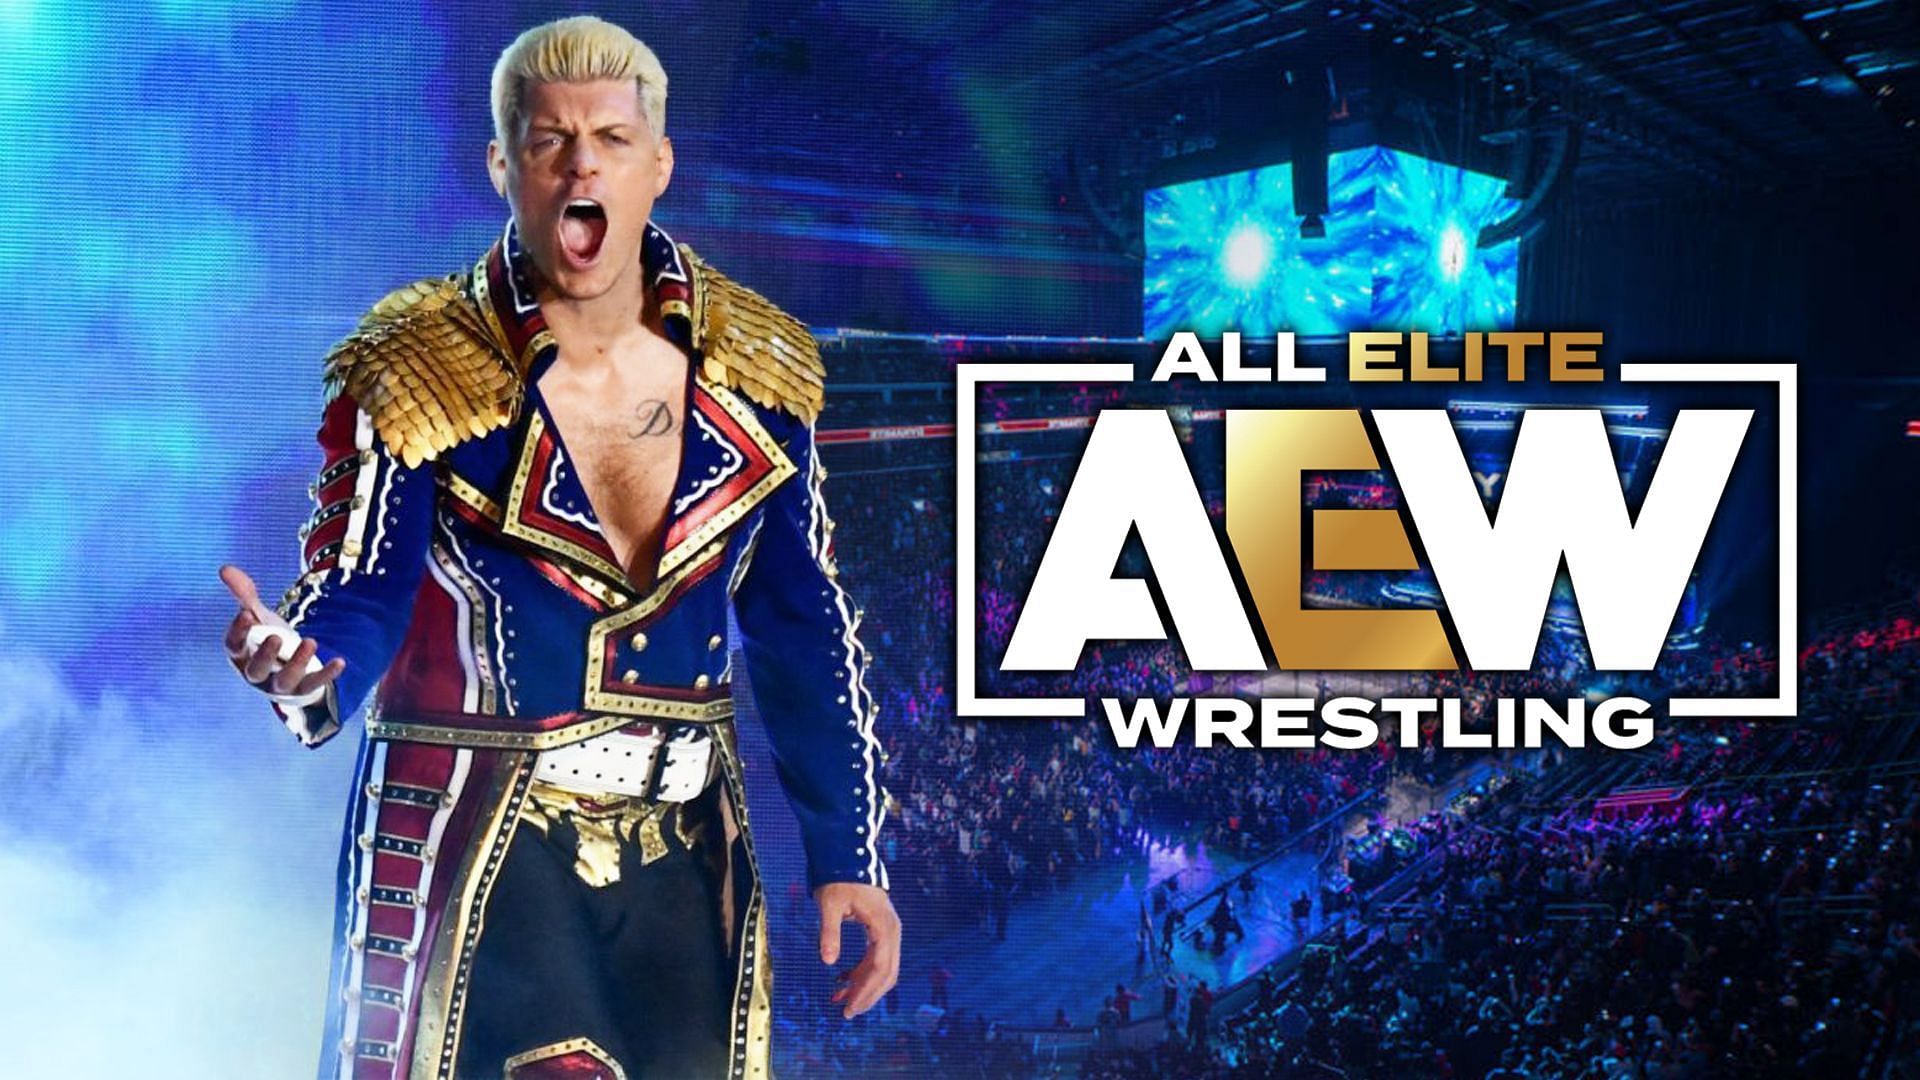 Cody Rhodes is a co-founder of All Elite Wrestling